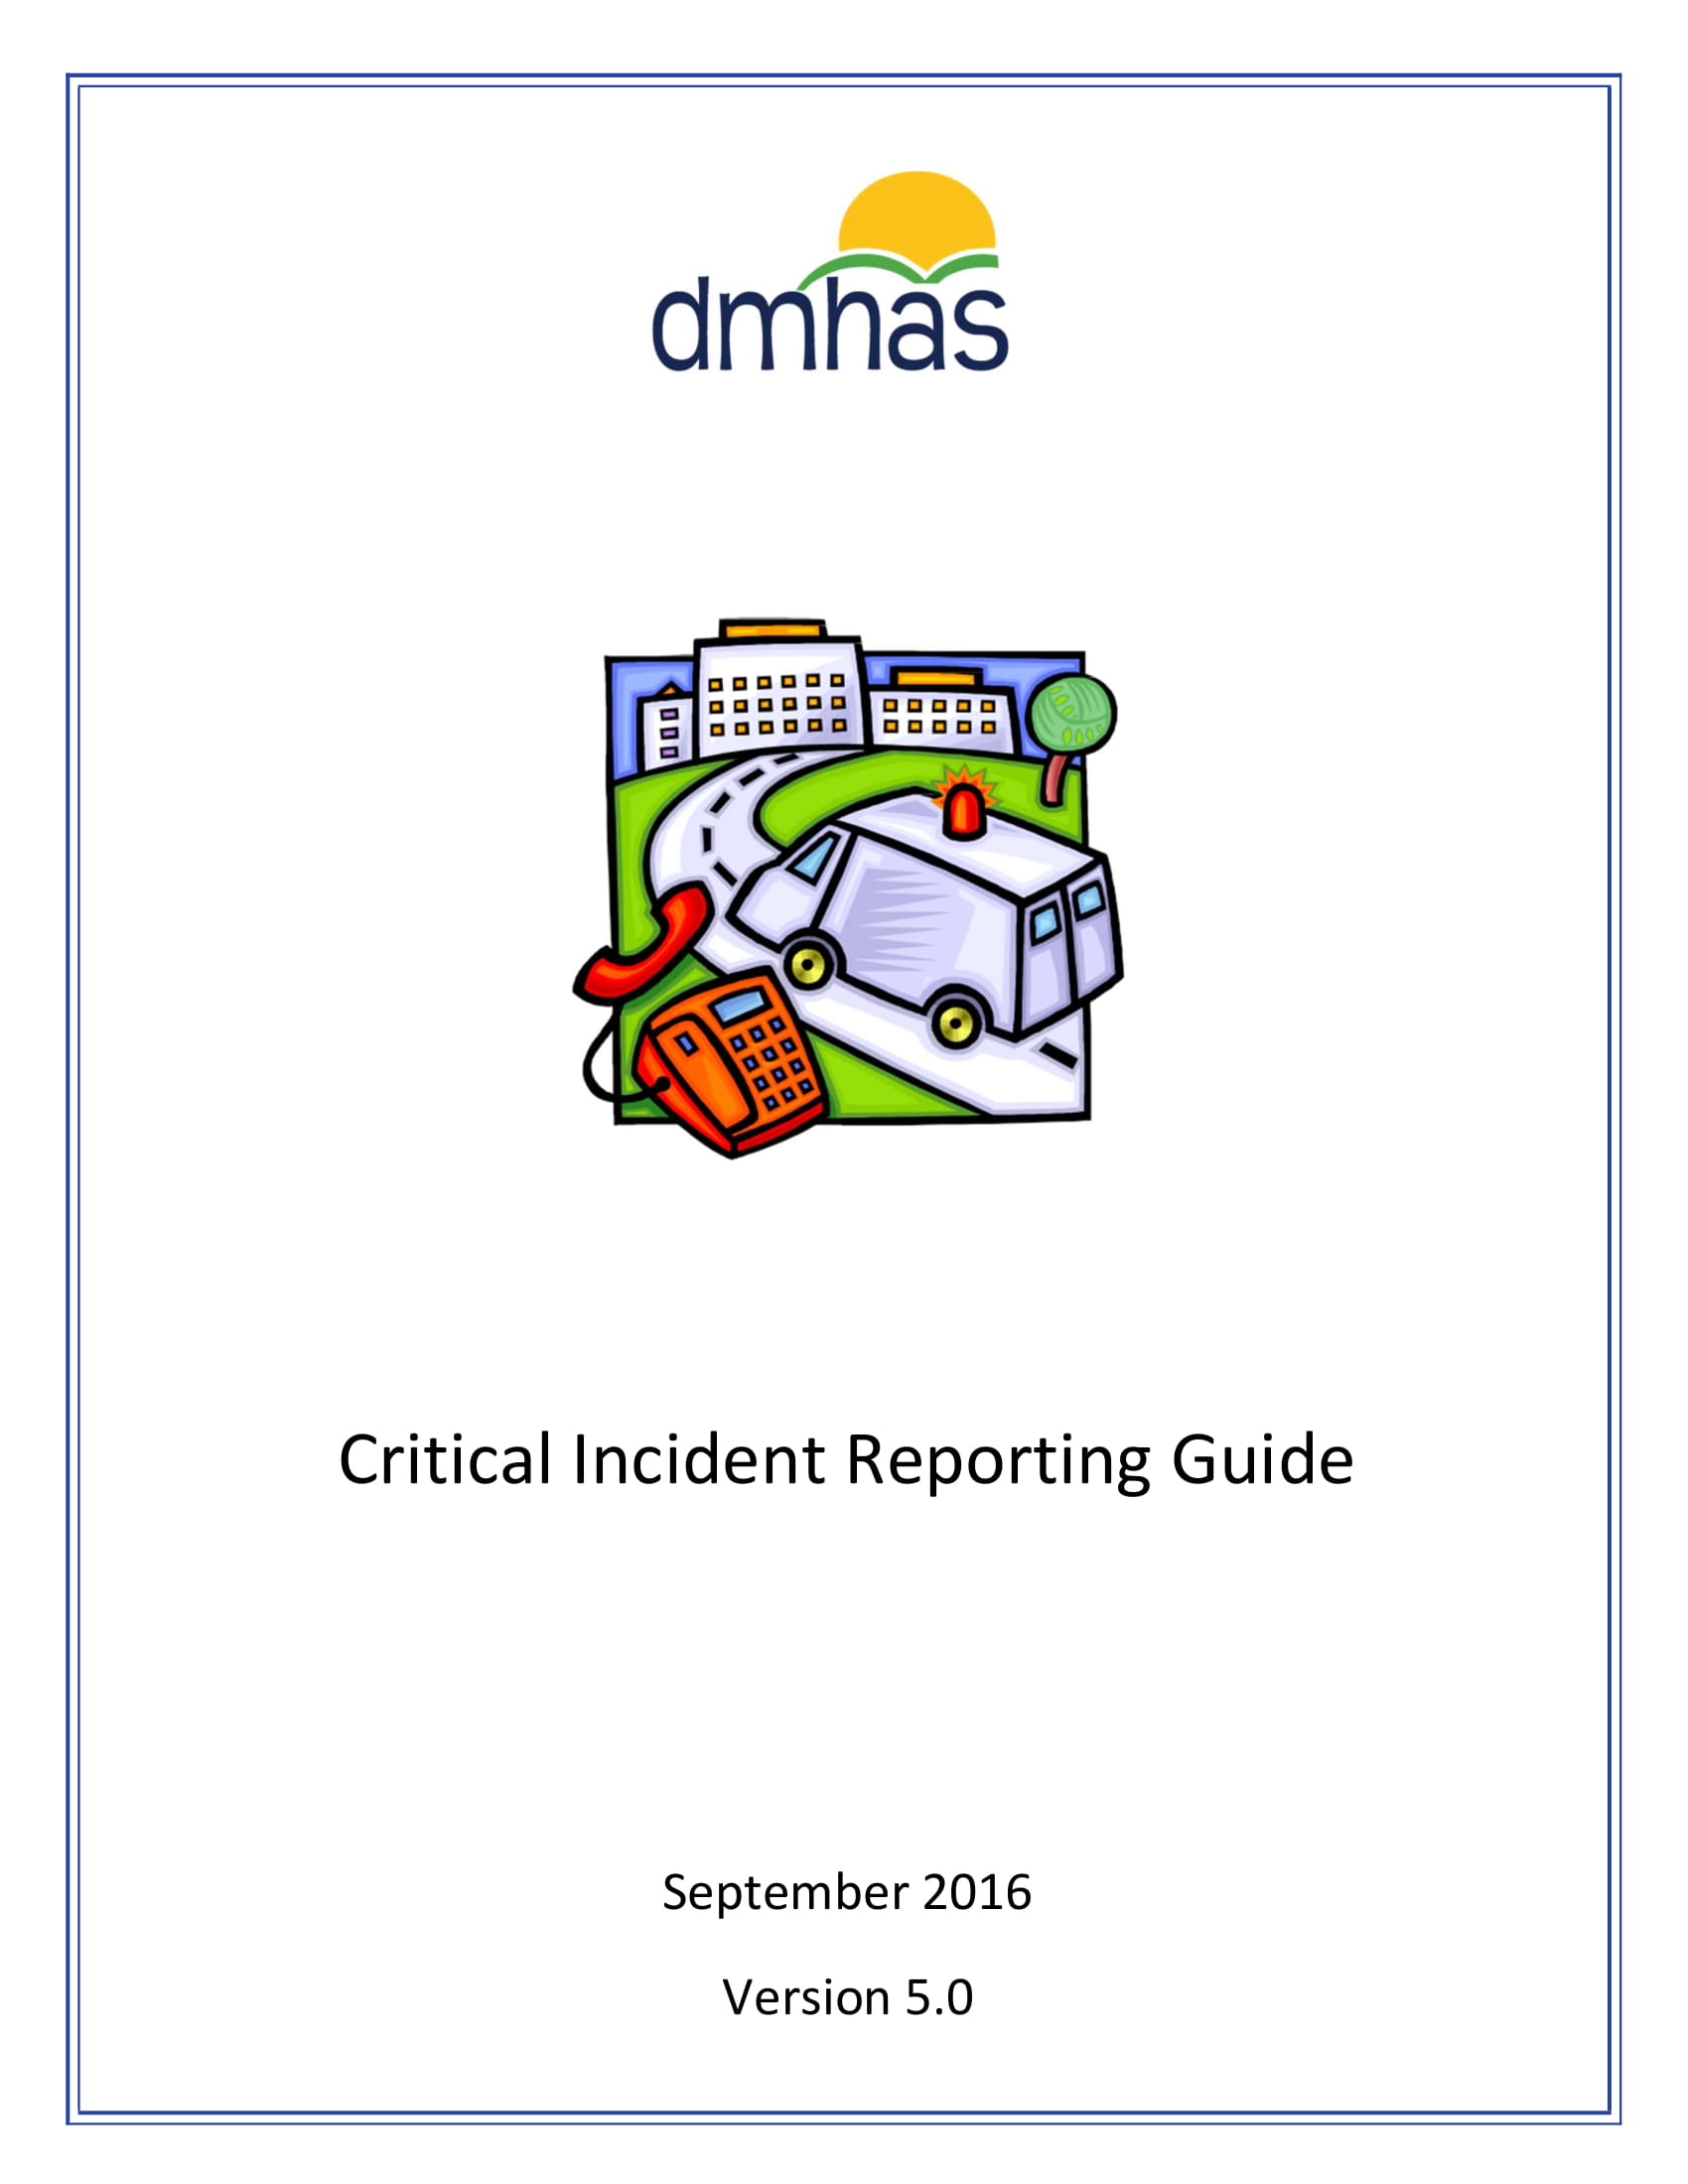 critical incident reporting guide example 01